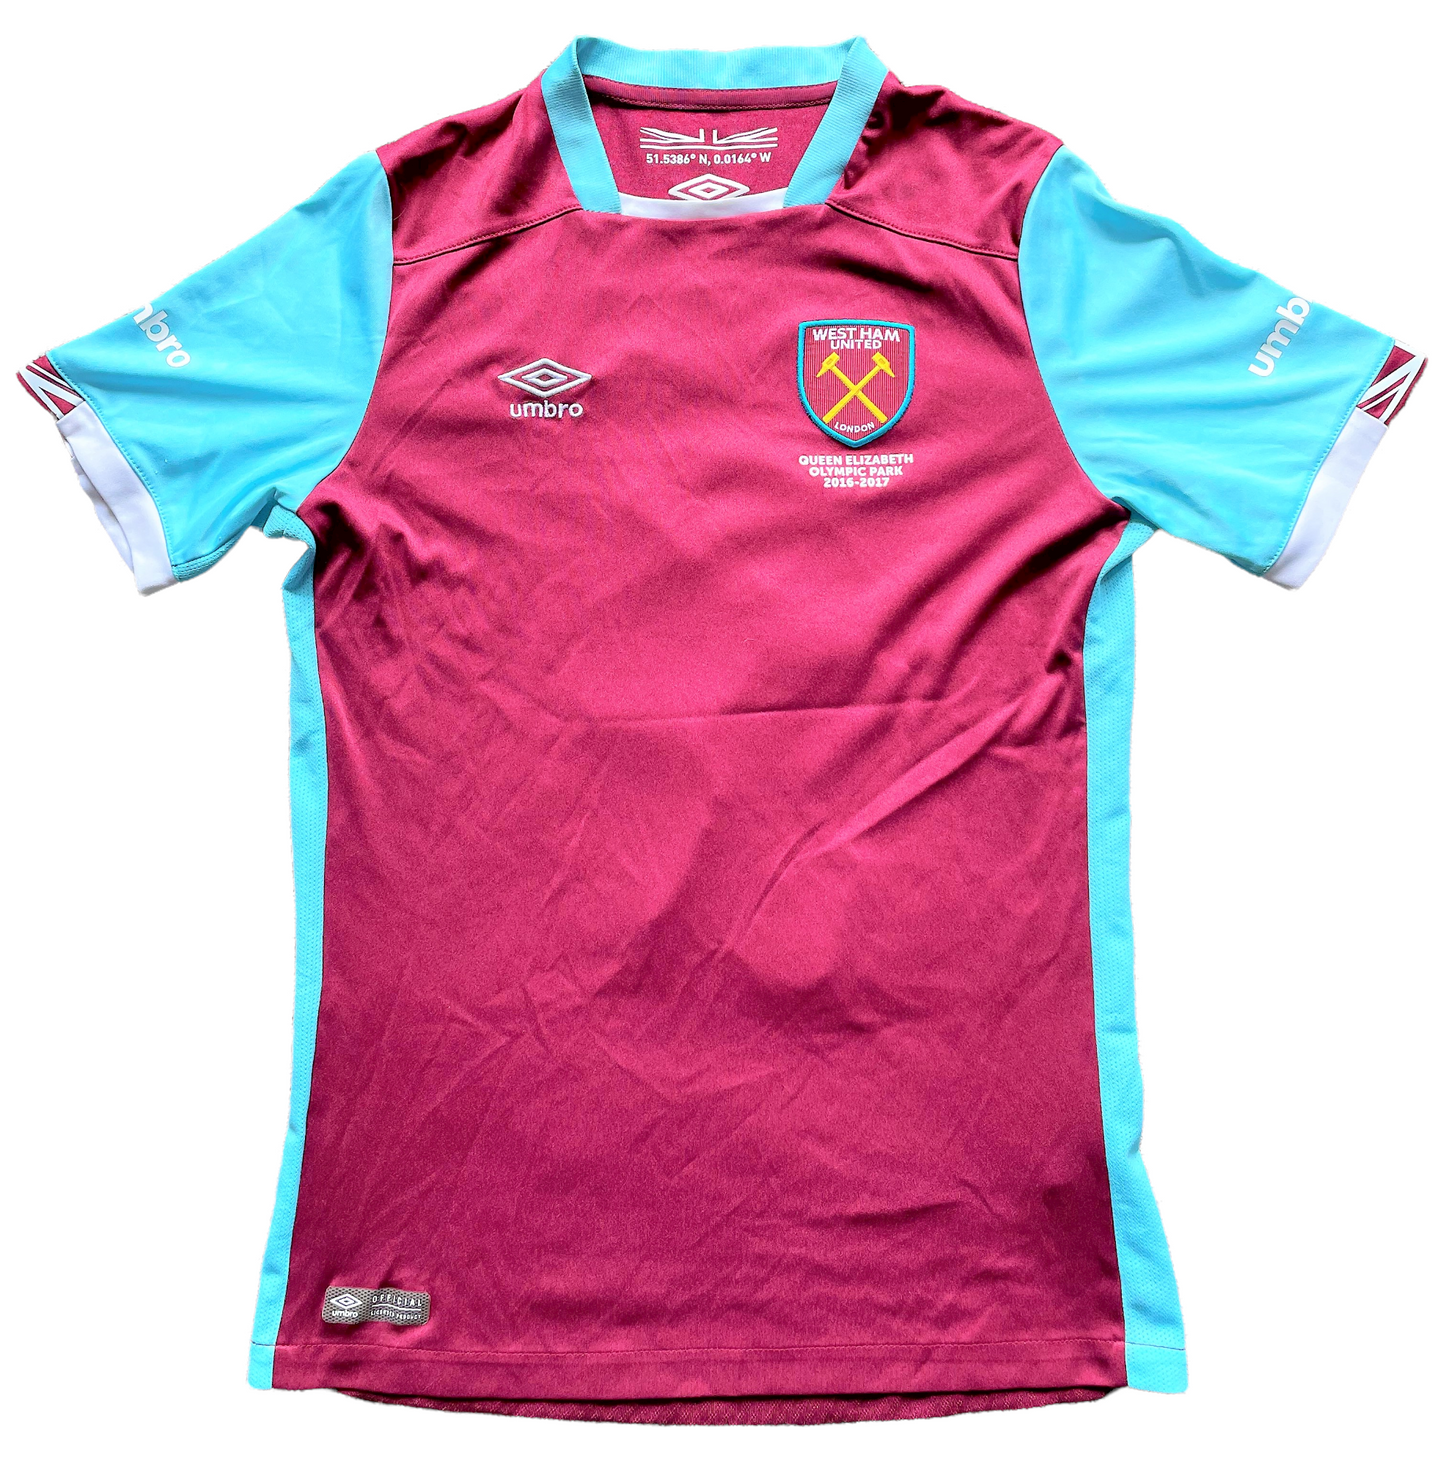 West Ham 2016 Home Shirt CARROLL 9 (very good) AdultsXXS/Large Boys. Height 21.5 inches